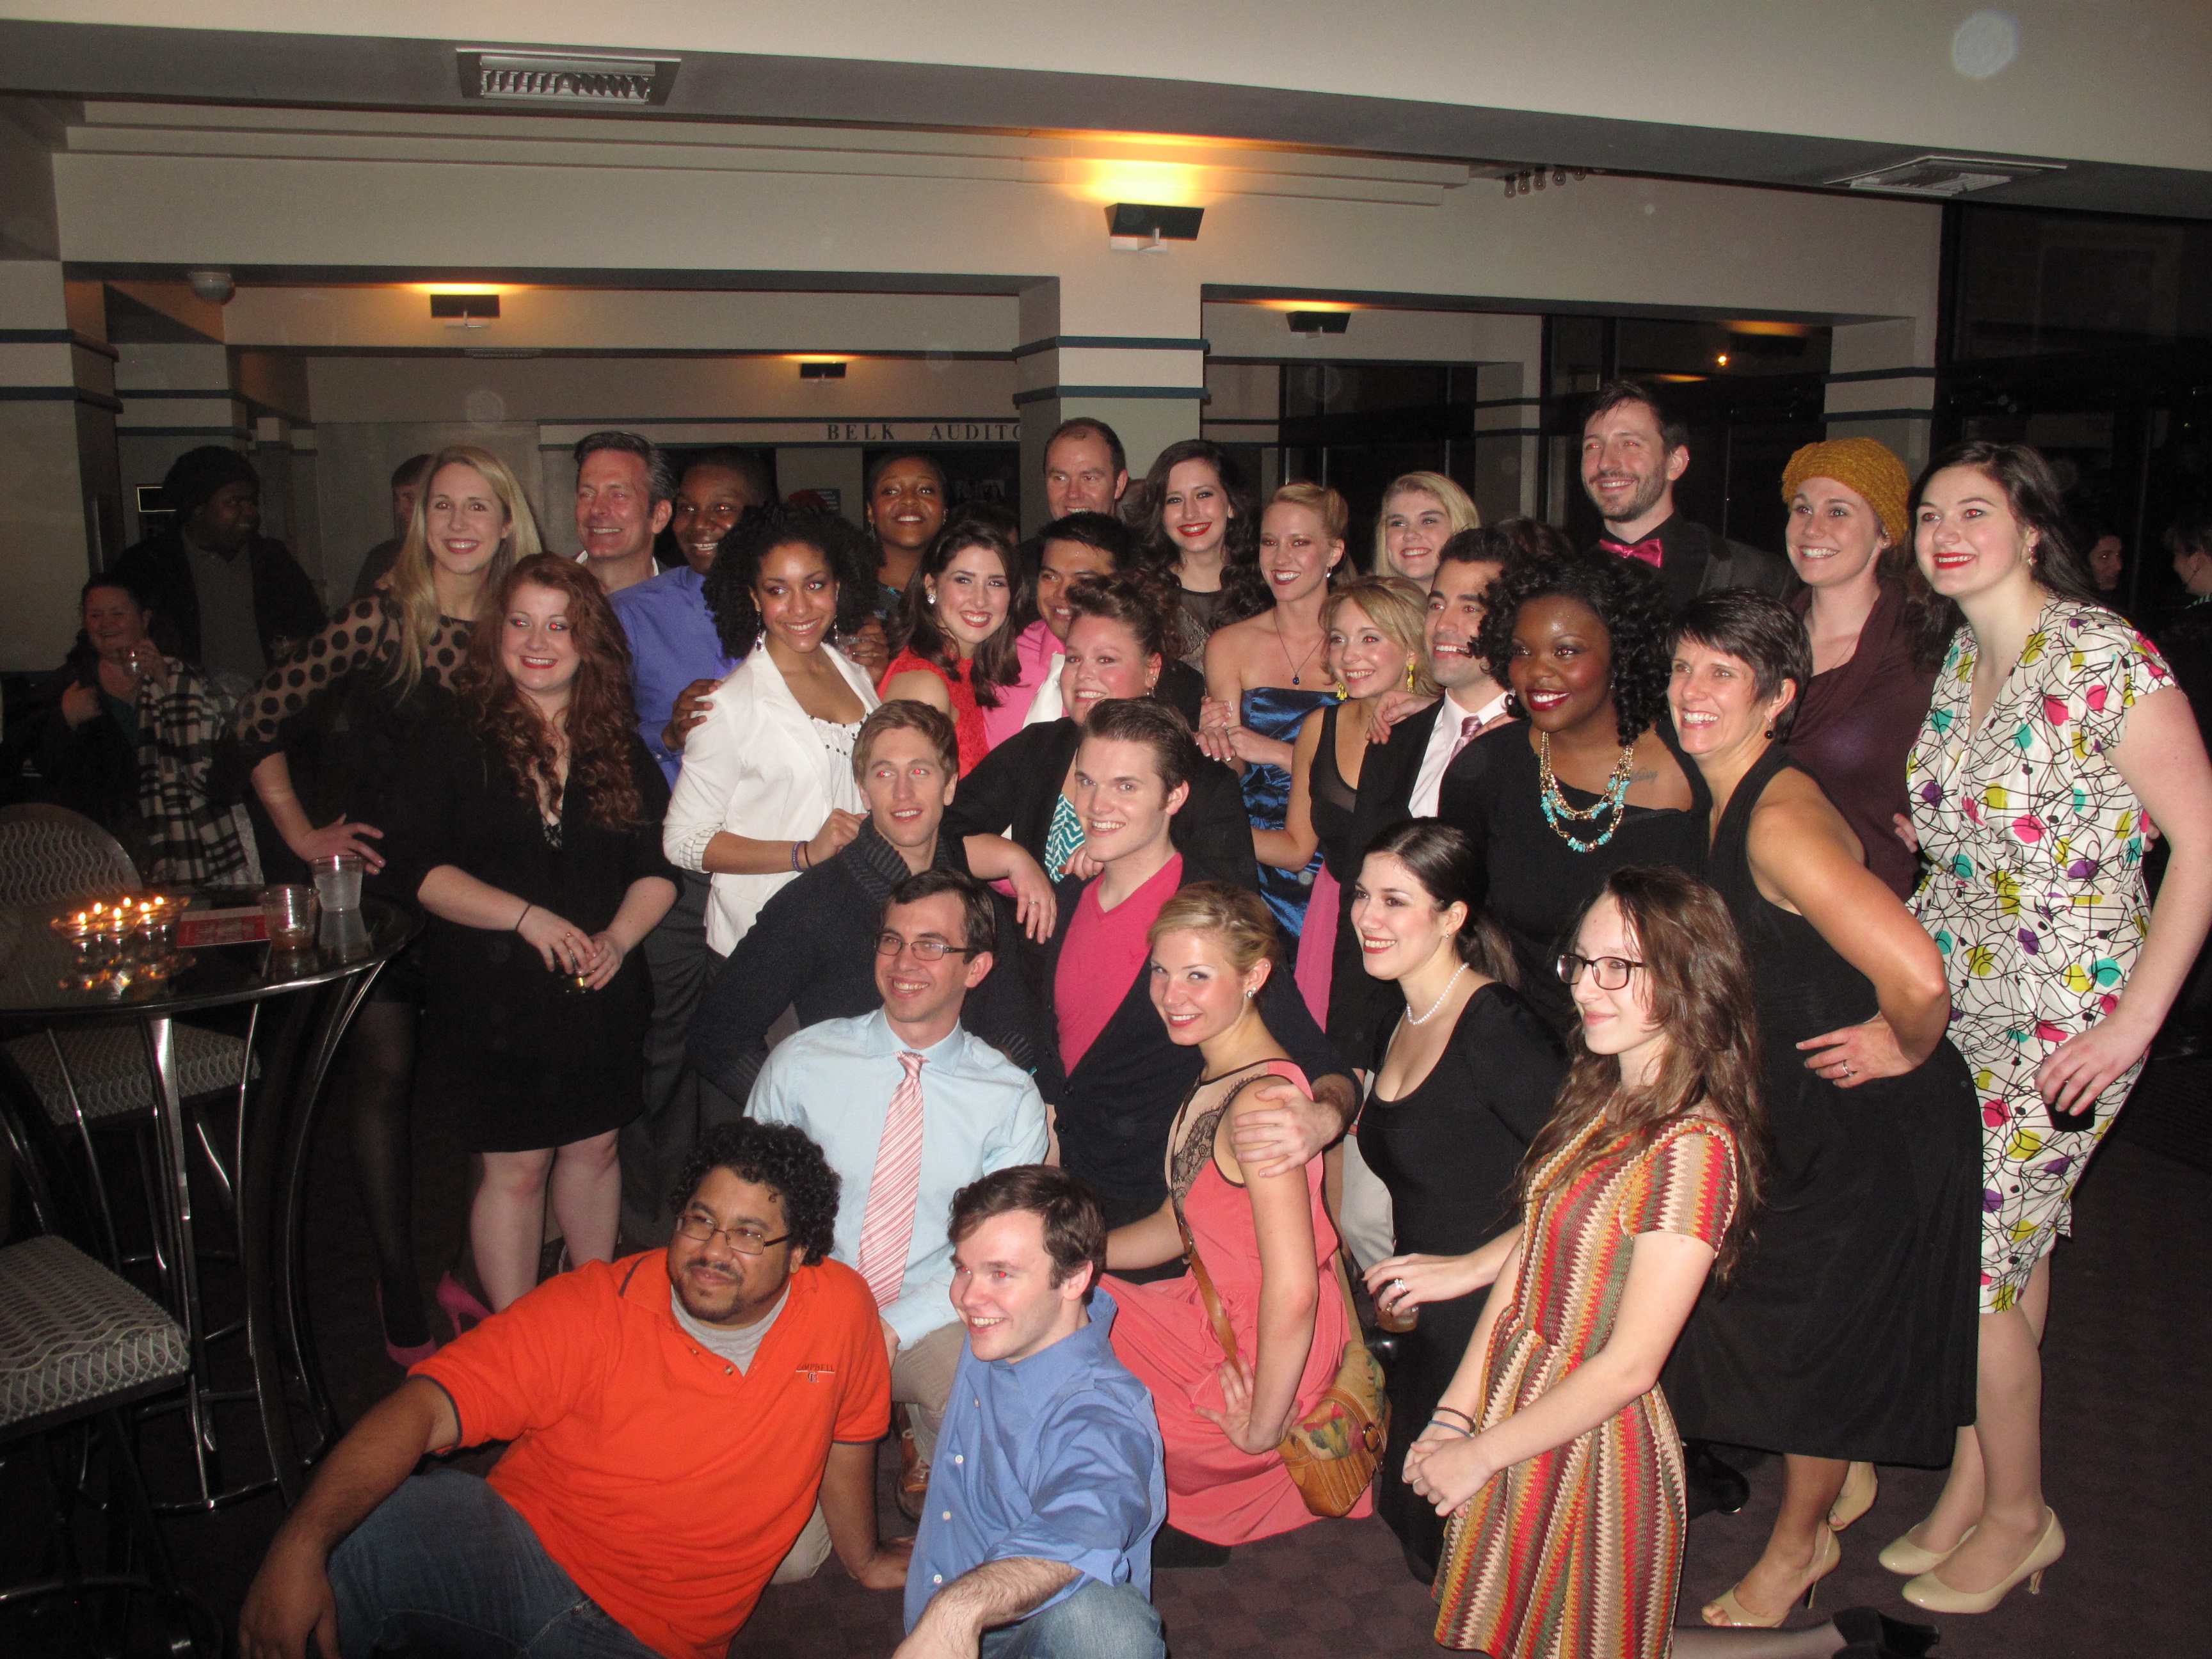 Legally Blonde Cast & Crew on Opening Night